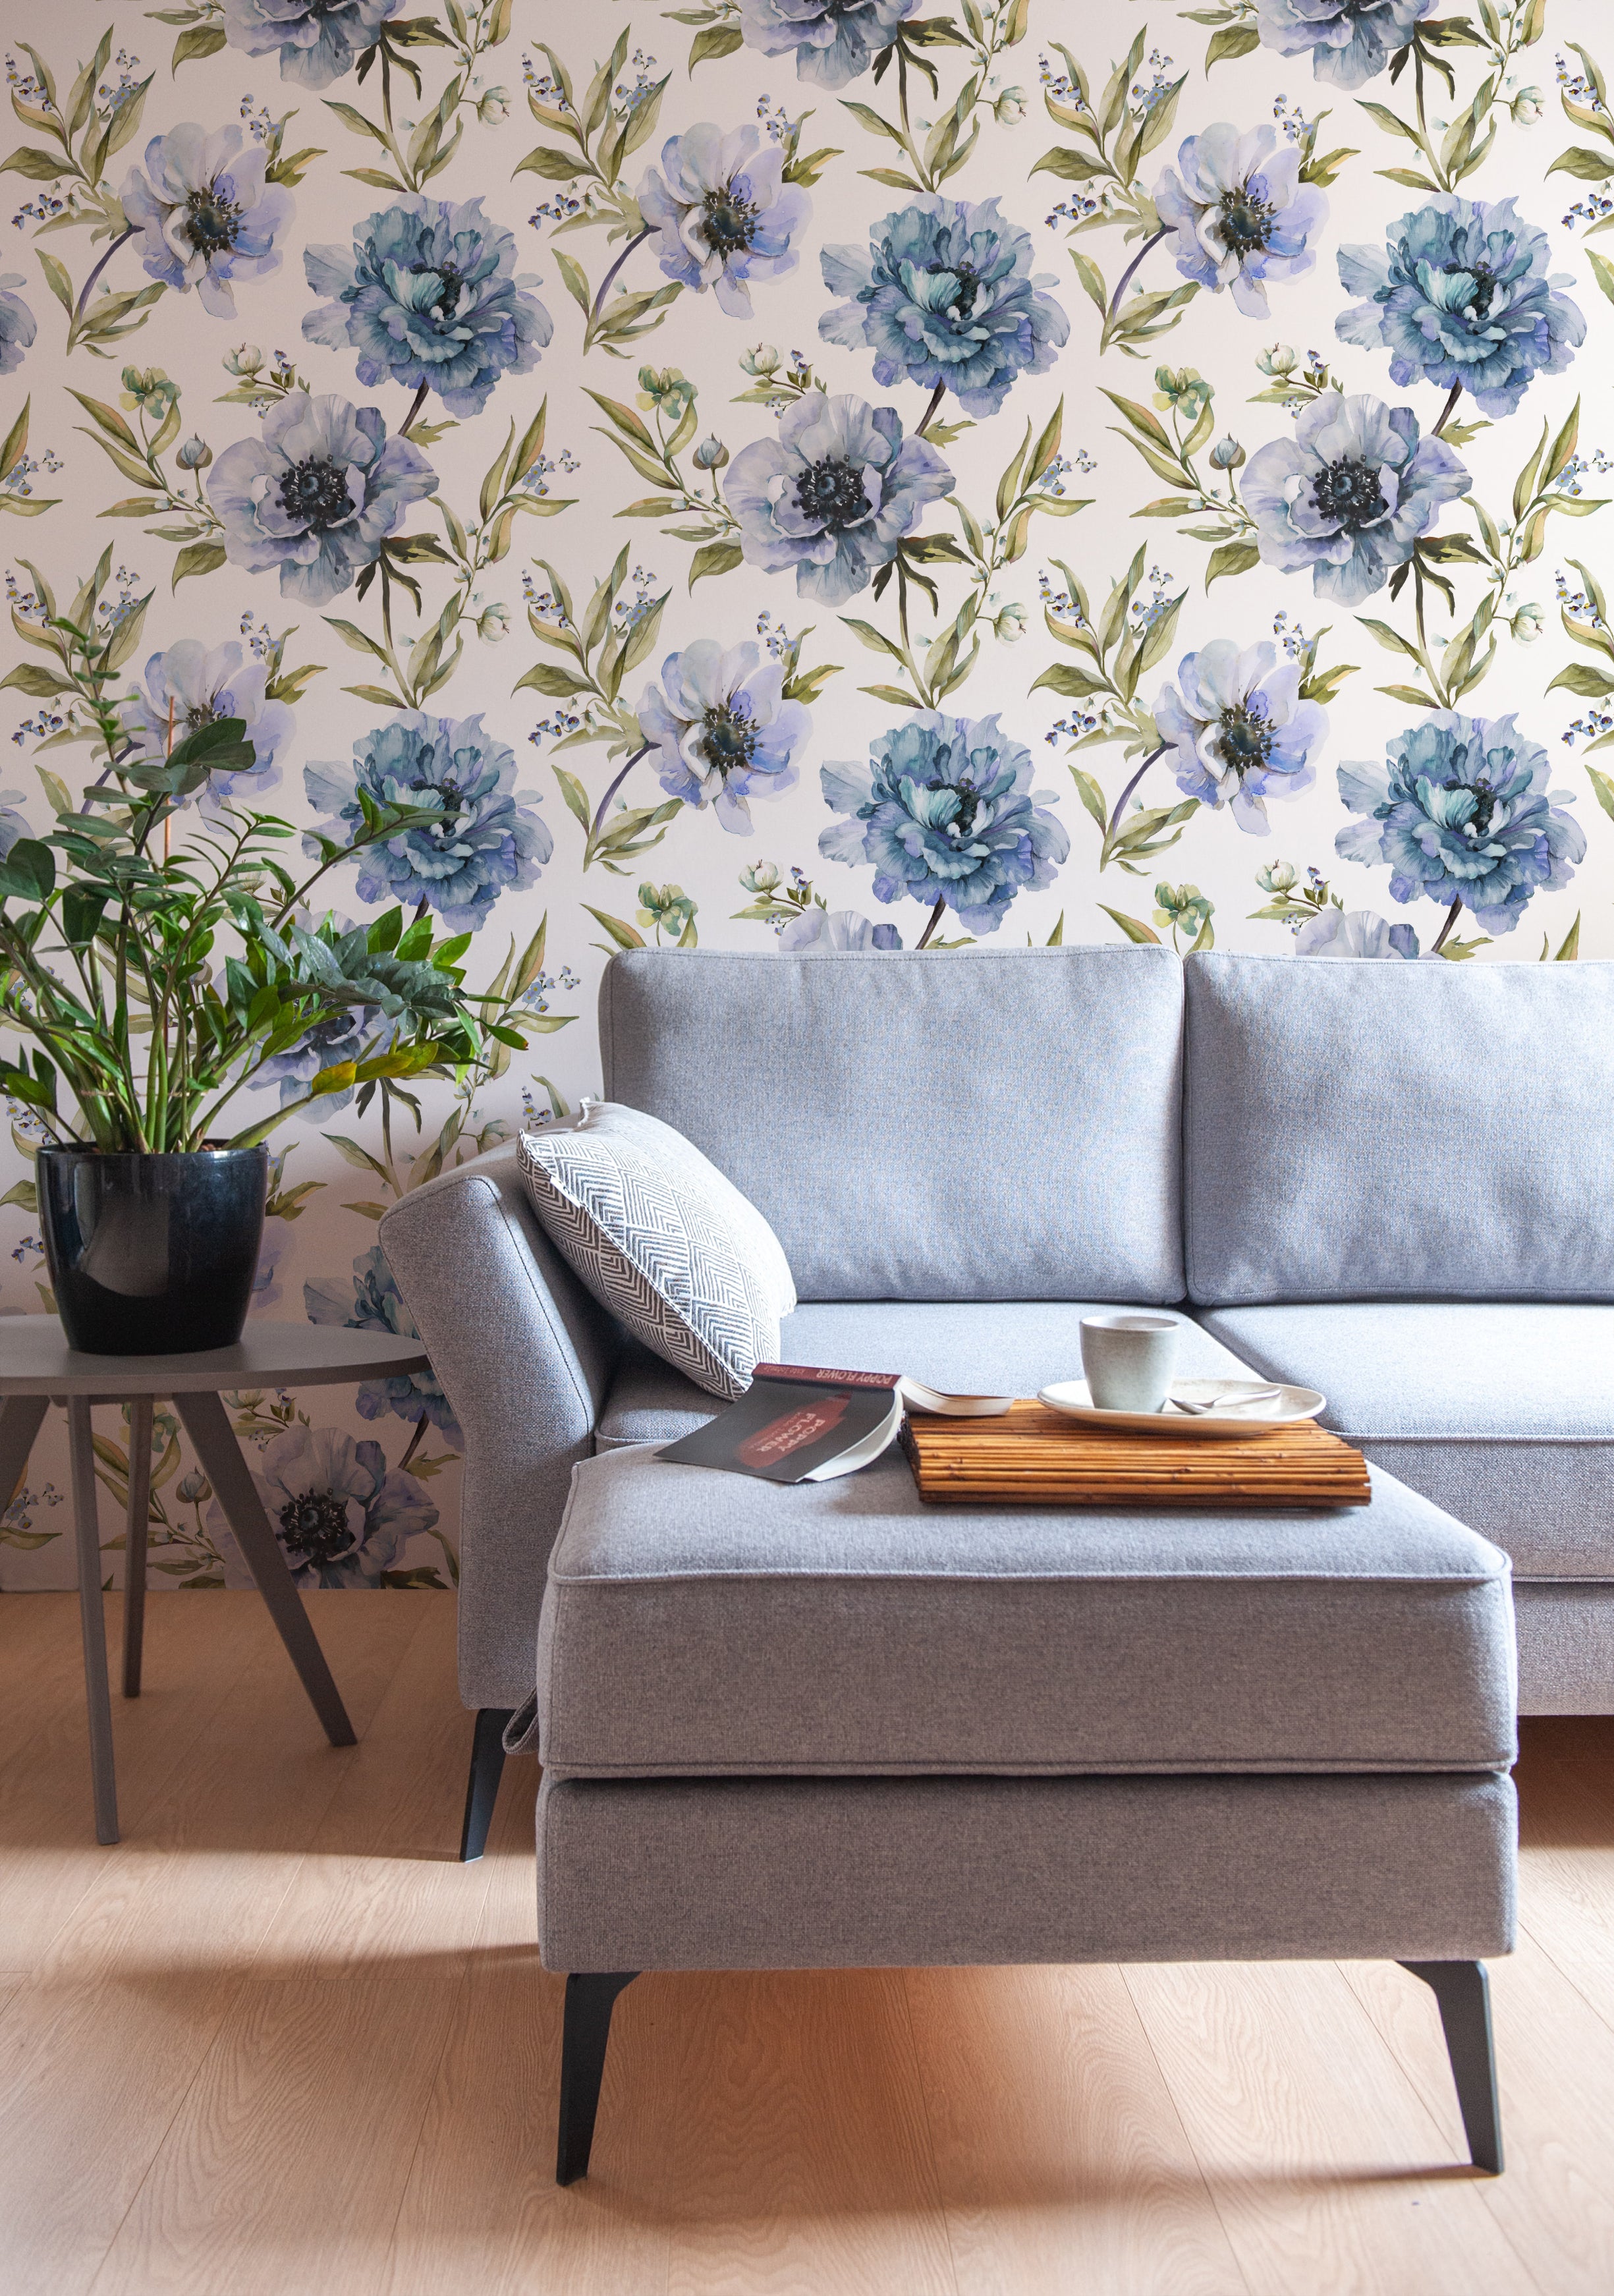 A stylish living room showcasing Indigo Floral Wallpaper, with large, beautifully detailed blue flowers against a soft white background, complementing the light grey fabric sofa and enhancing the room’s elegant aesthetic.